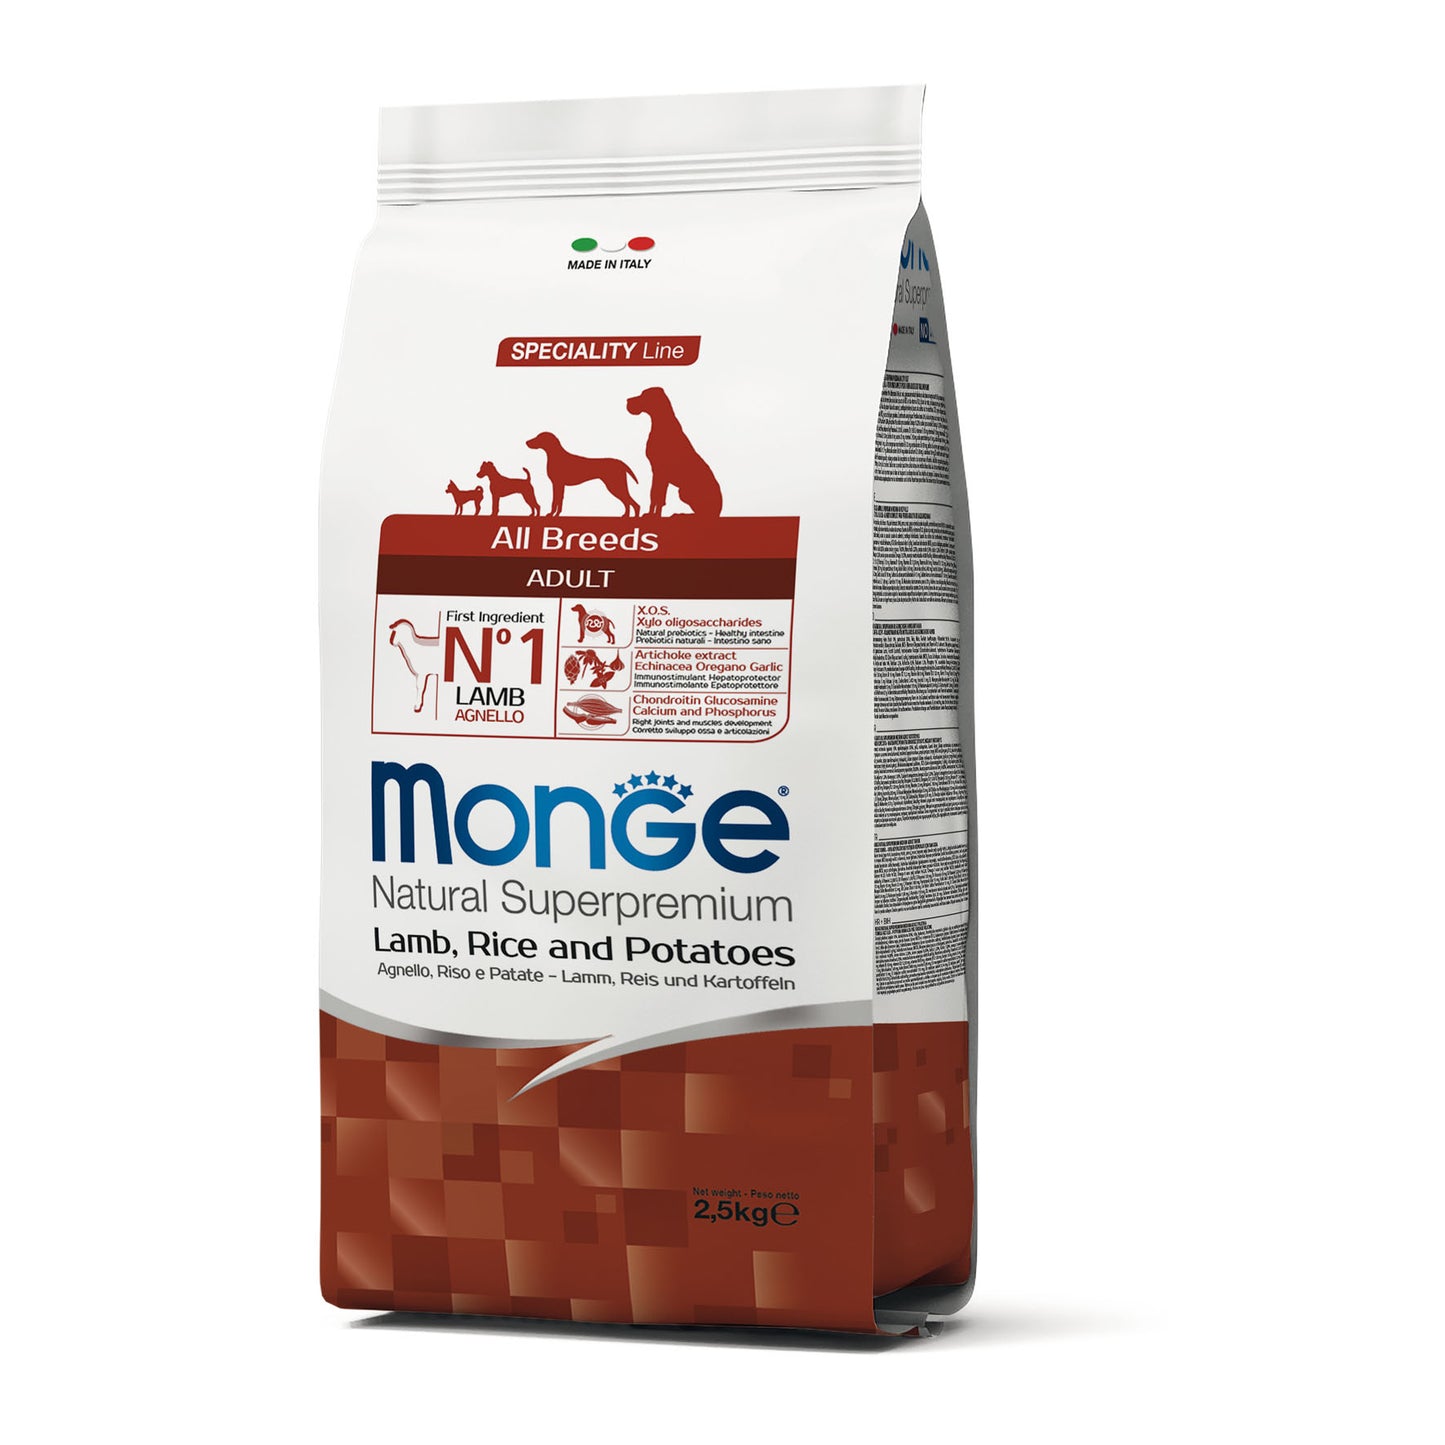 Monge Dog - SPECIALITY Line - Monoprotein - Adult ALL BREEDS Lamb